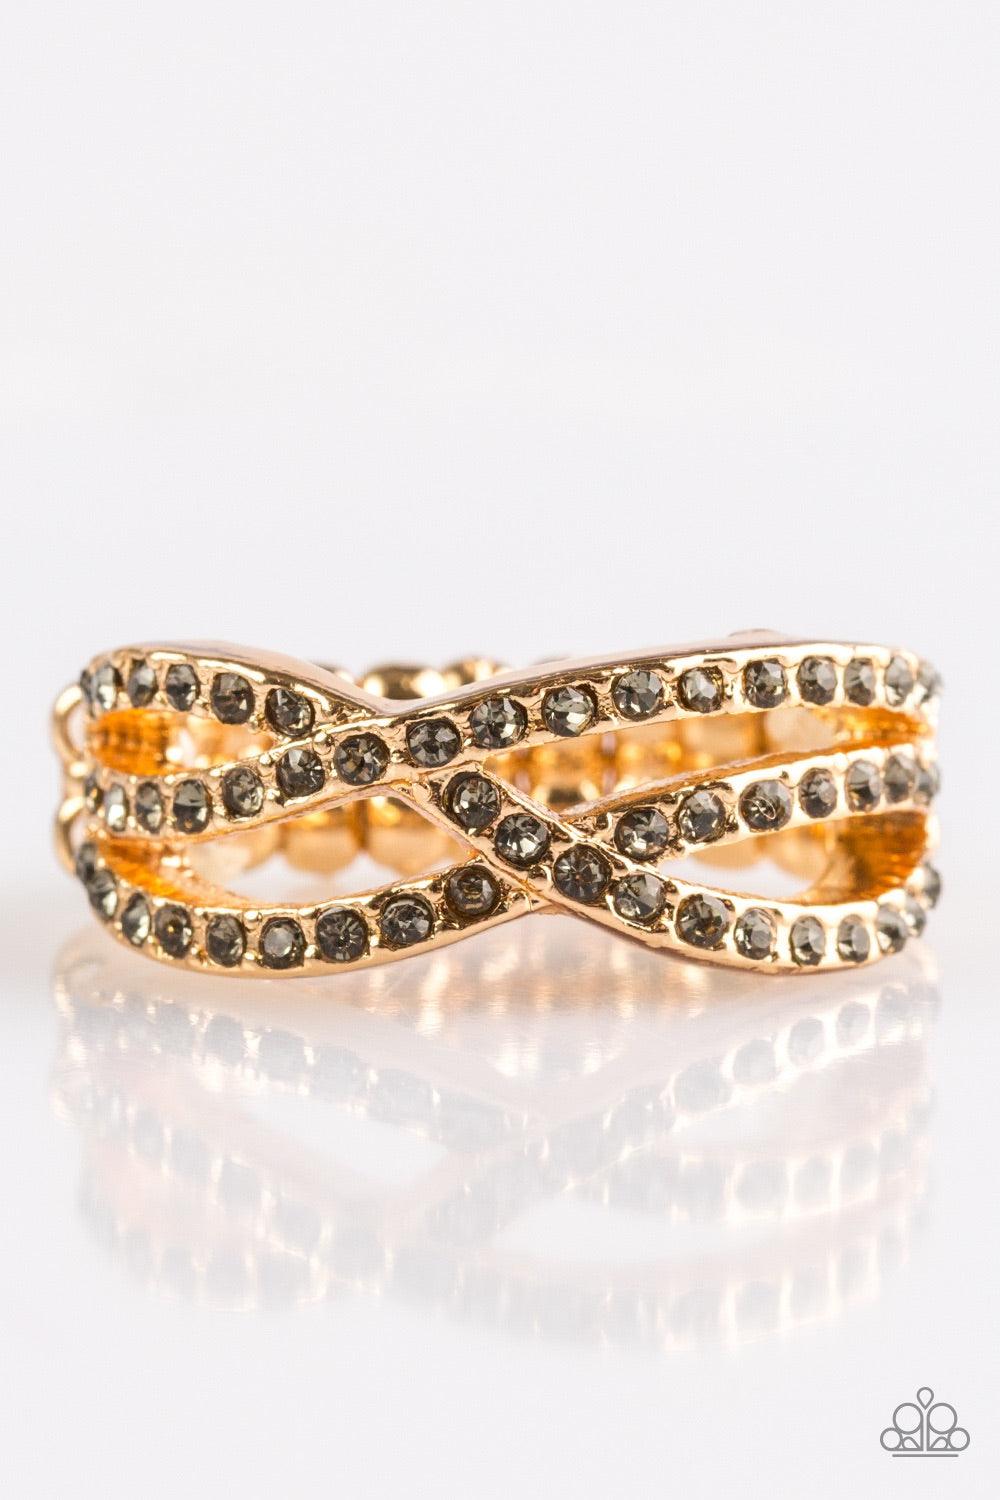 Paparazzi Accessories CACHE Advance - Gold Encrusted in glittery smoky rhinestones, shimmery ribbons of gold crisscross across the finger in a timeless fashion. Features a dainty stretchy band for a flexible fit. Jewelry